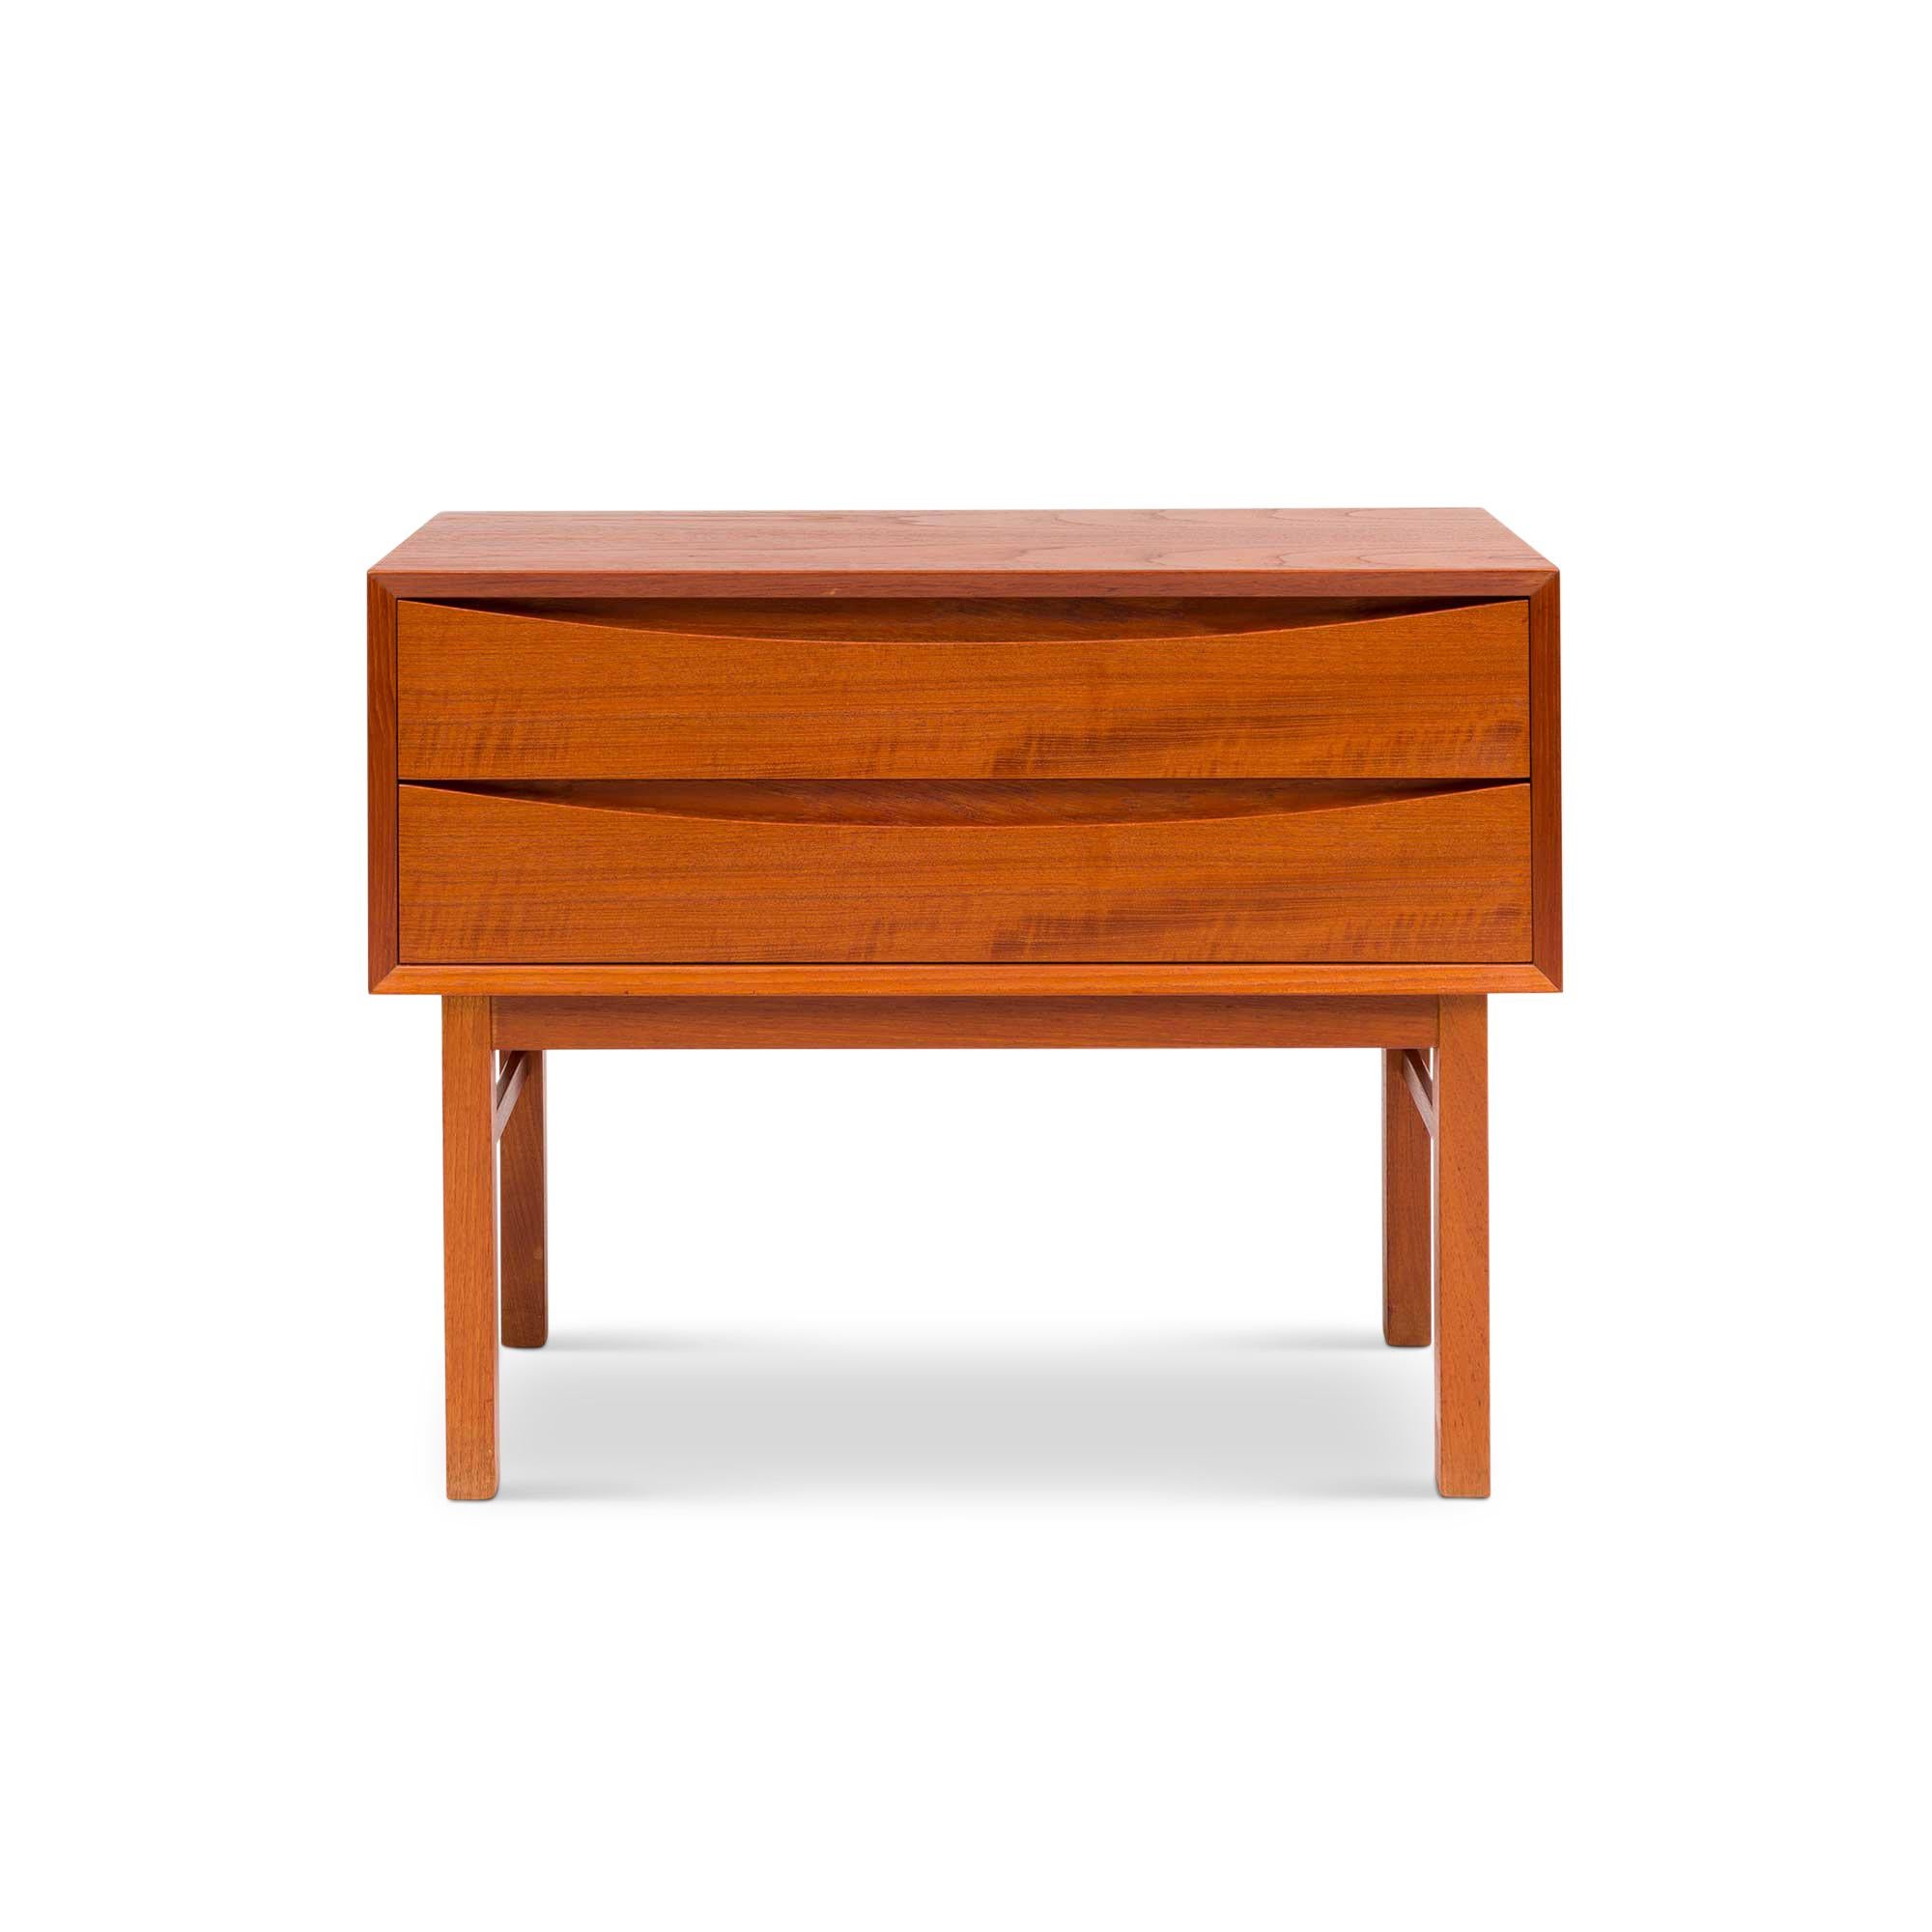 Danish Mid-Century furniture epitomizes Scandinavian design principles with its timeless elegance, functionality, and exceptional craftsmanship. Flourishing in the 1950s and 1960s, it reflects post-war sensibilities of simplicity and connection to